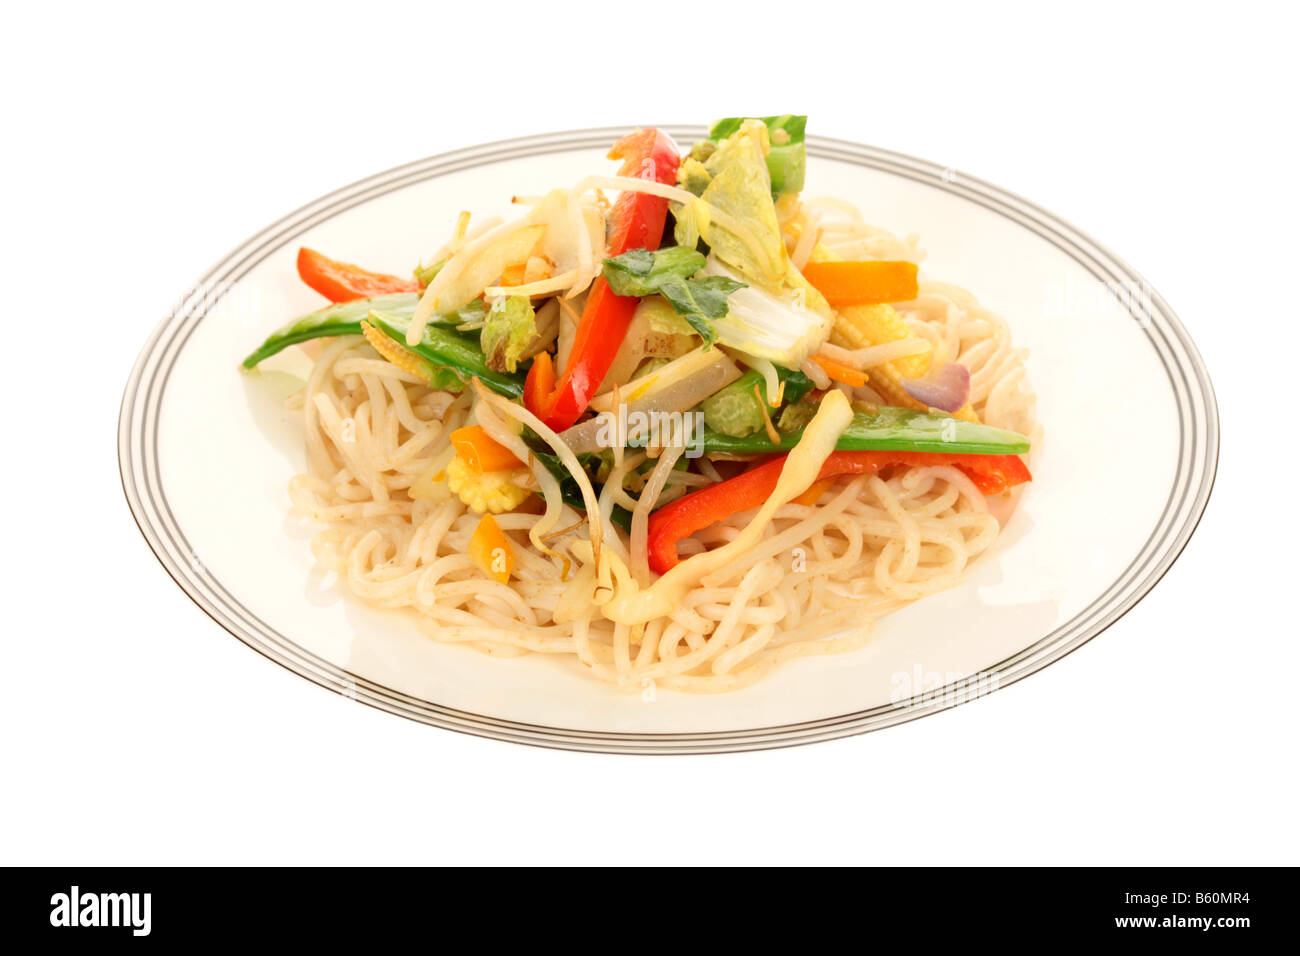 Fresh Healthy Asian Style Vegetarian Meal Of Noodles And Stir Fried Vegetables Isolated Against A White Background With No People And A Clipping Path Stock Photo